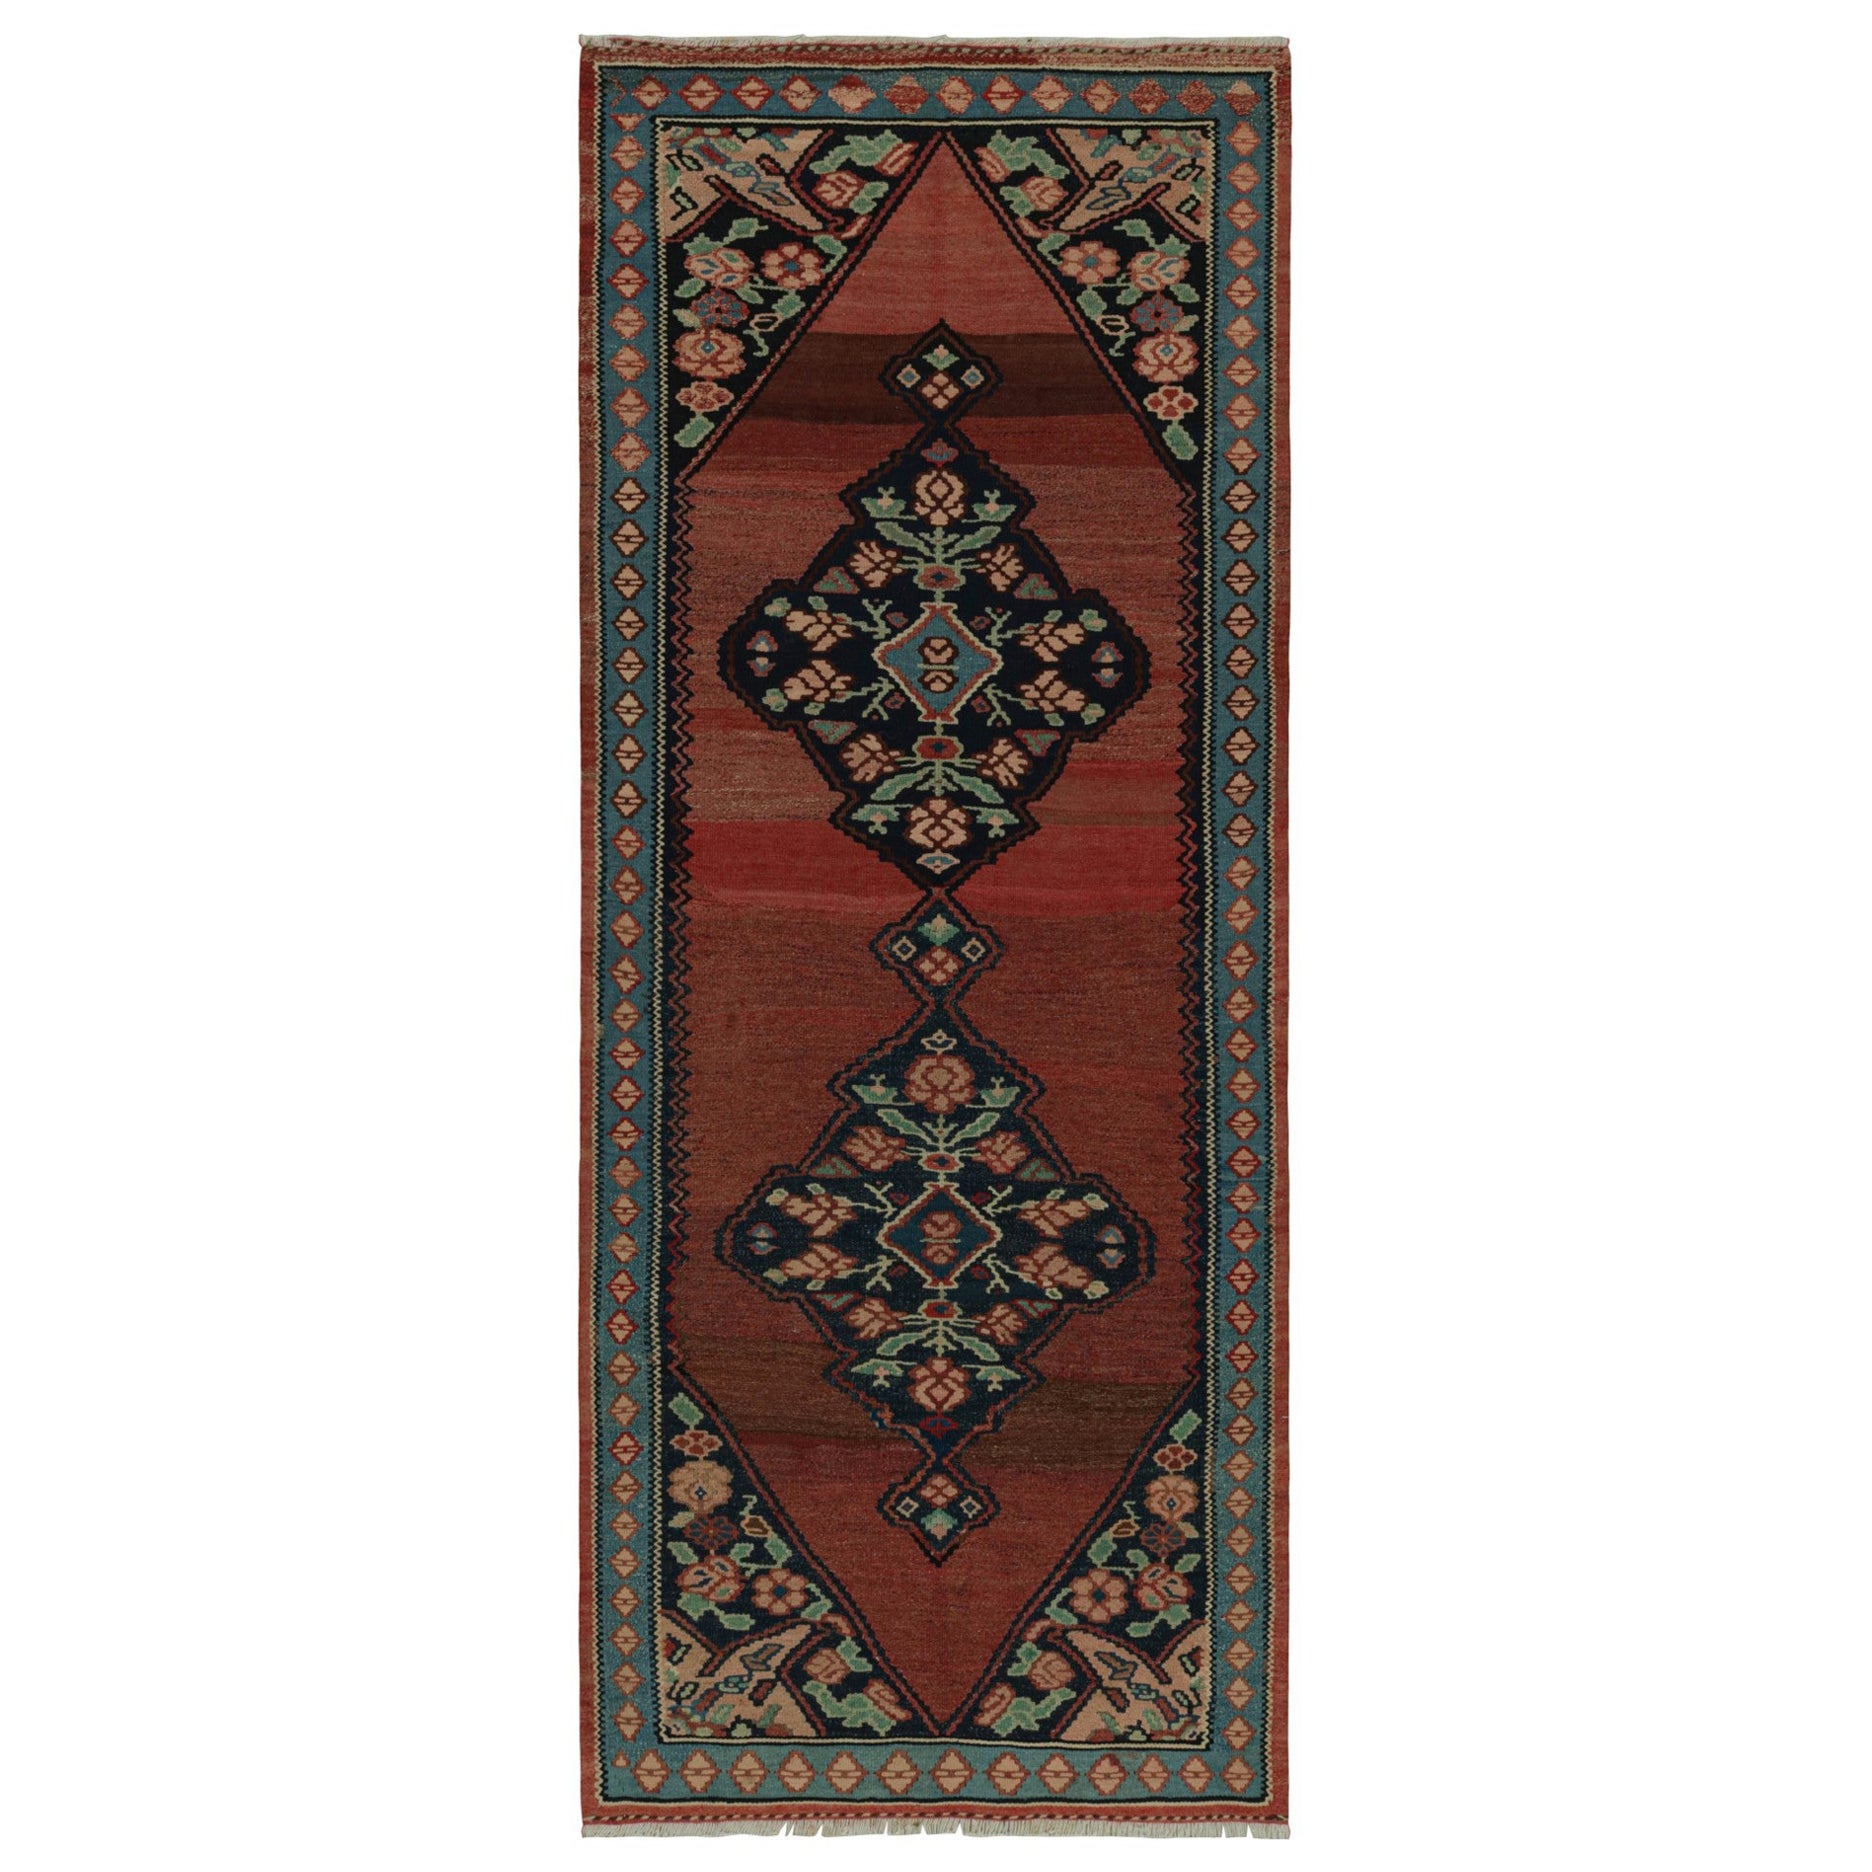 Rug & Kilim’s Afghan Tribal Kilim with Medallions and Geometric Floral Patterns For Sale